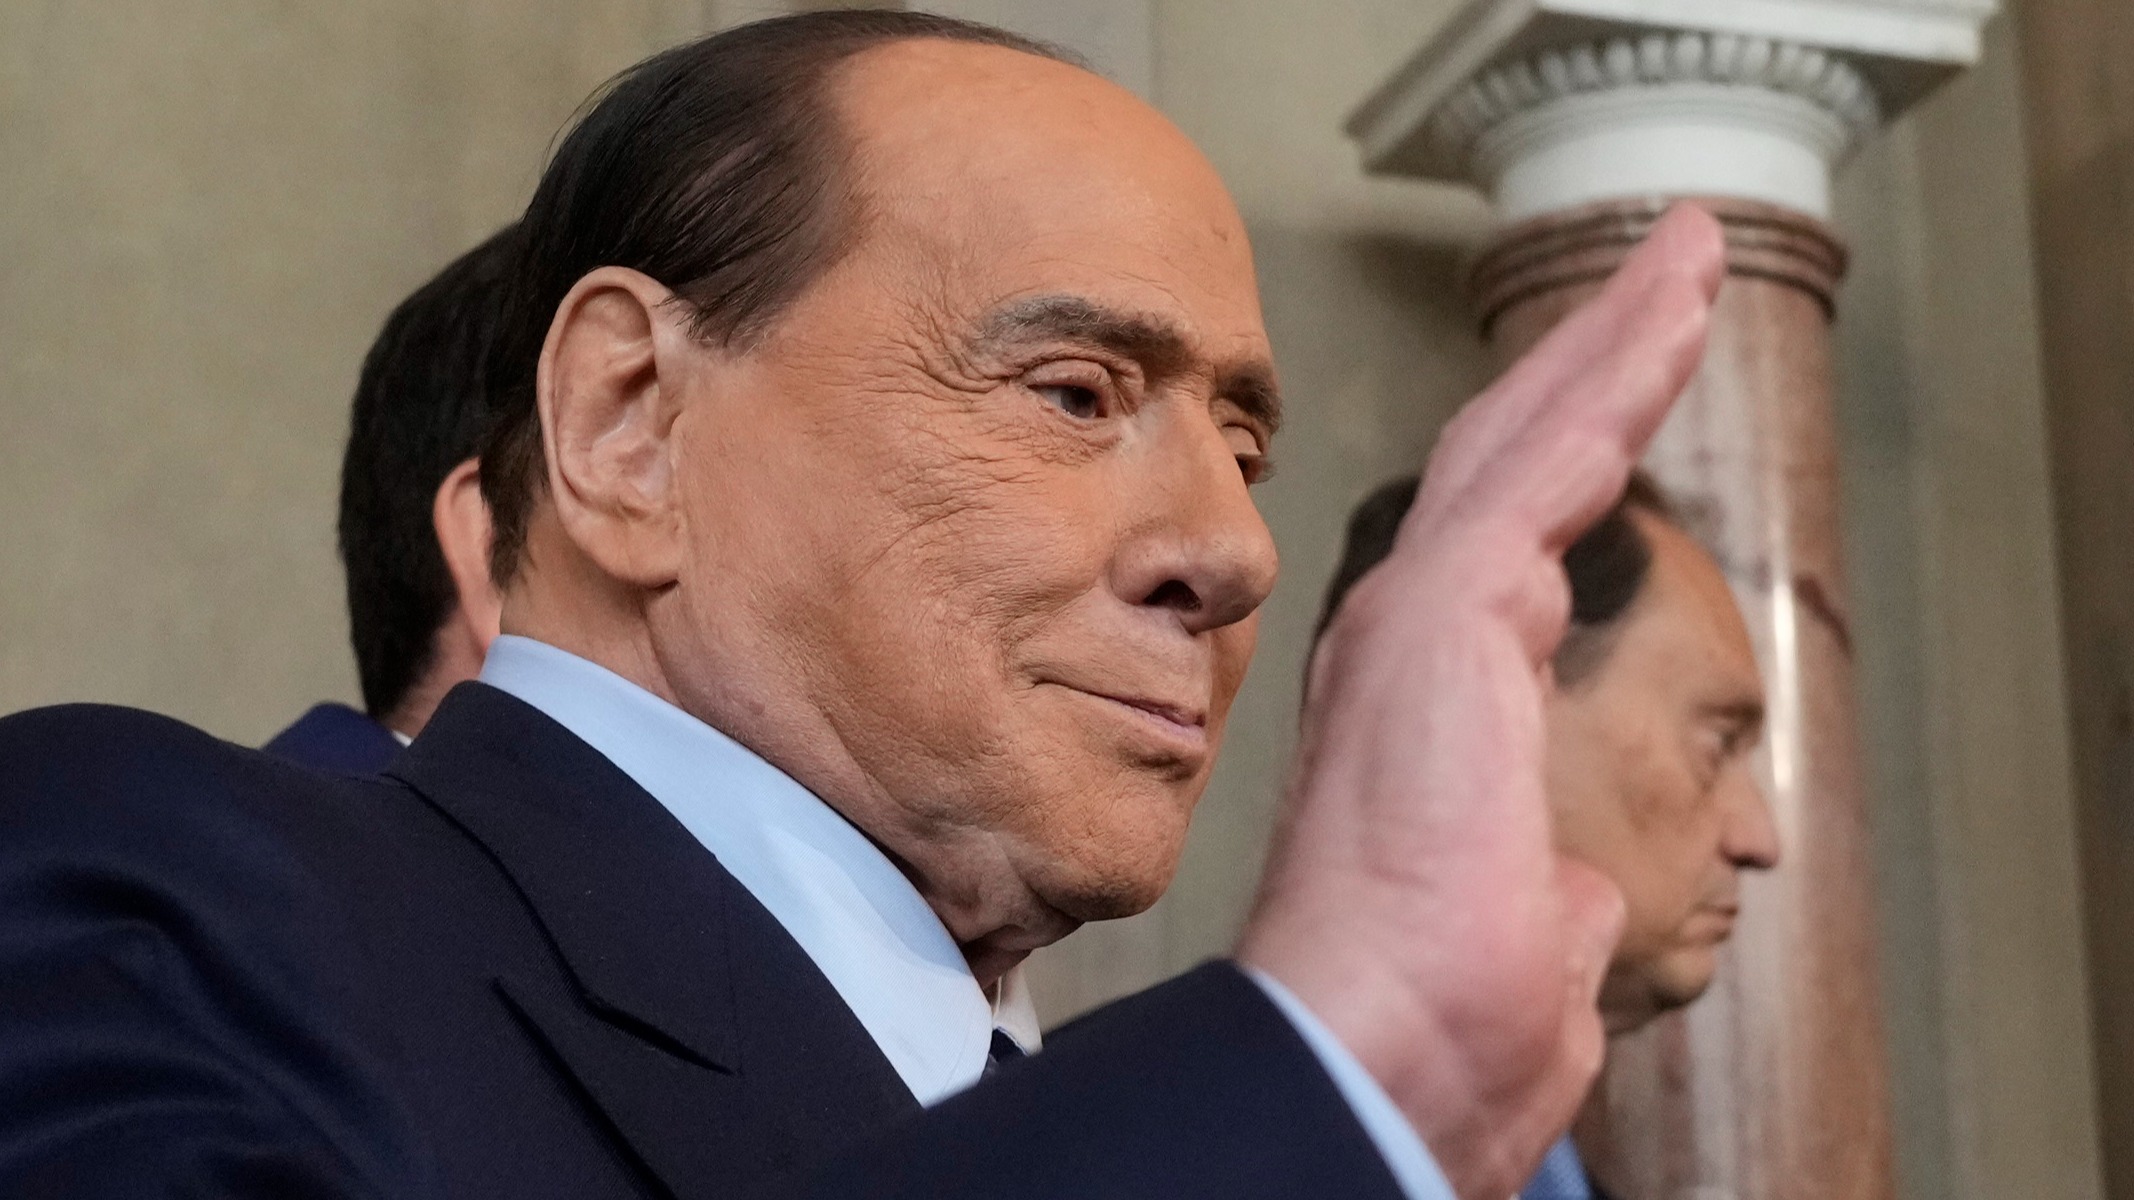 Former Italian PM Silvio Berlusconi dies aged 86 after years of health ...